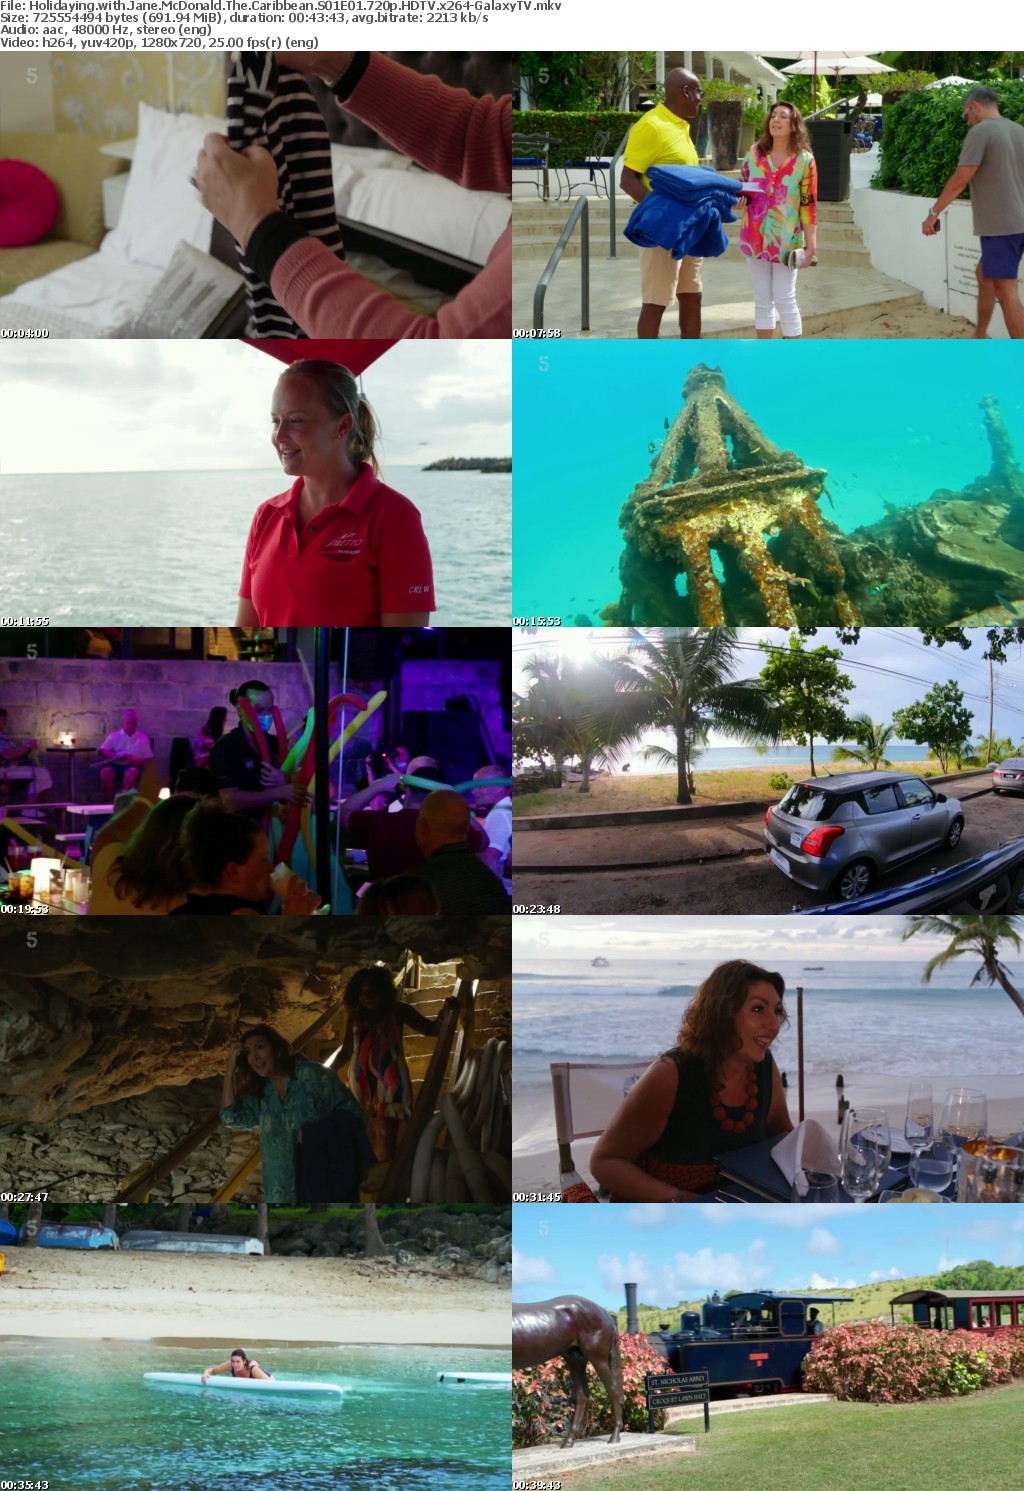 Holidaying with Jane McDonald The Caribbean S01 COMPLETE 720p HDTV x264-GalaxyTV